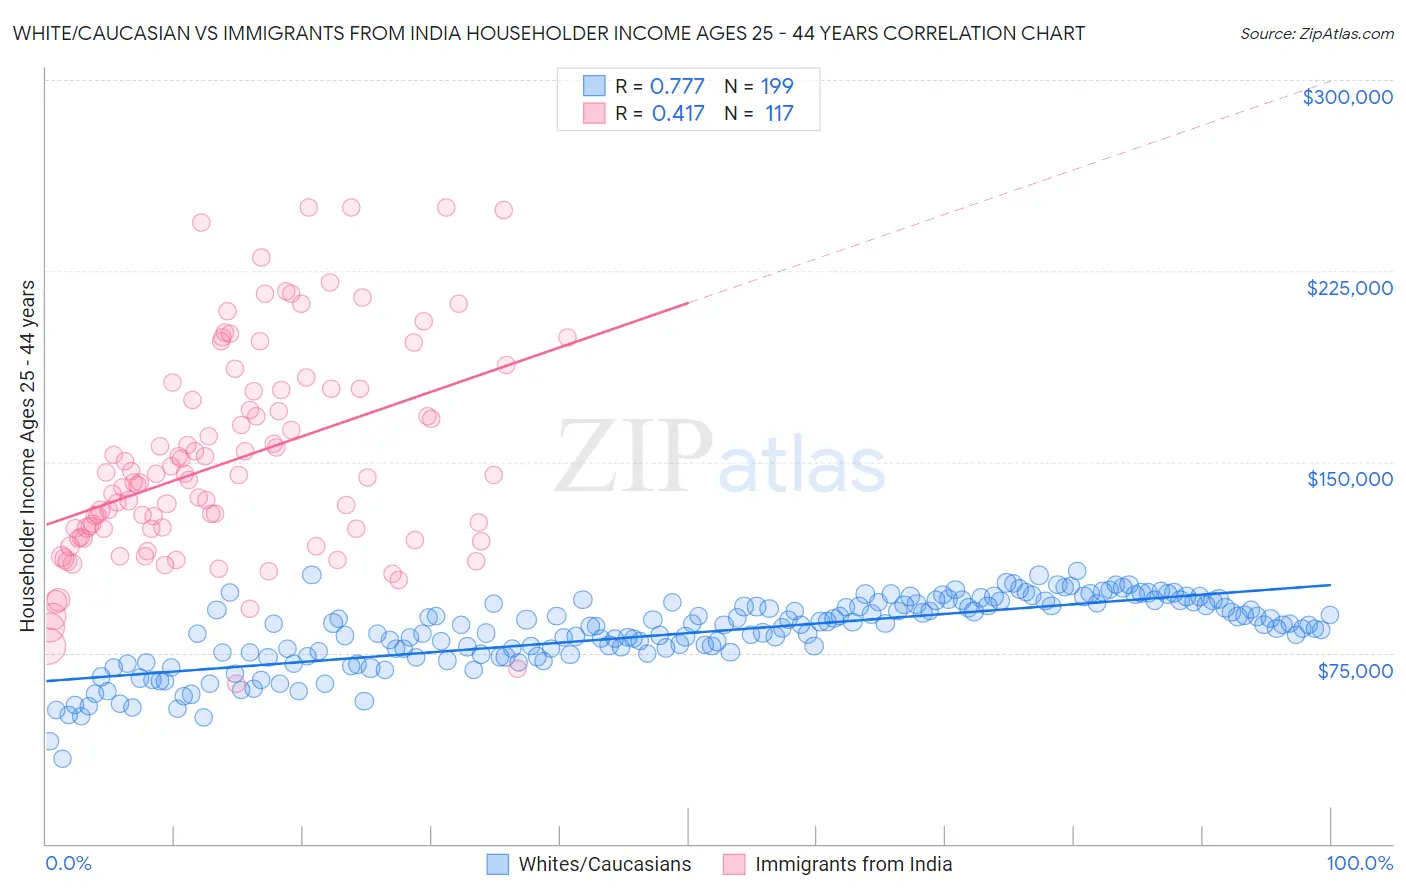 White/Caucasian vs Immigrants from India Householder Income Ages 25 - 44 years